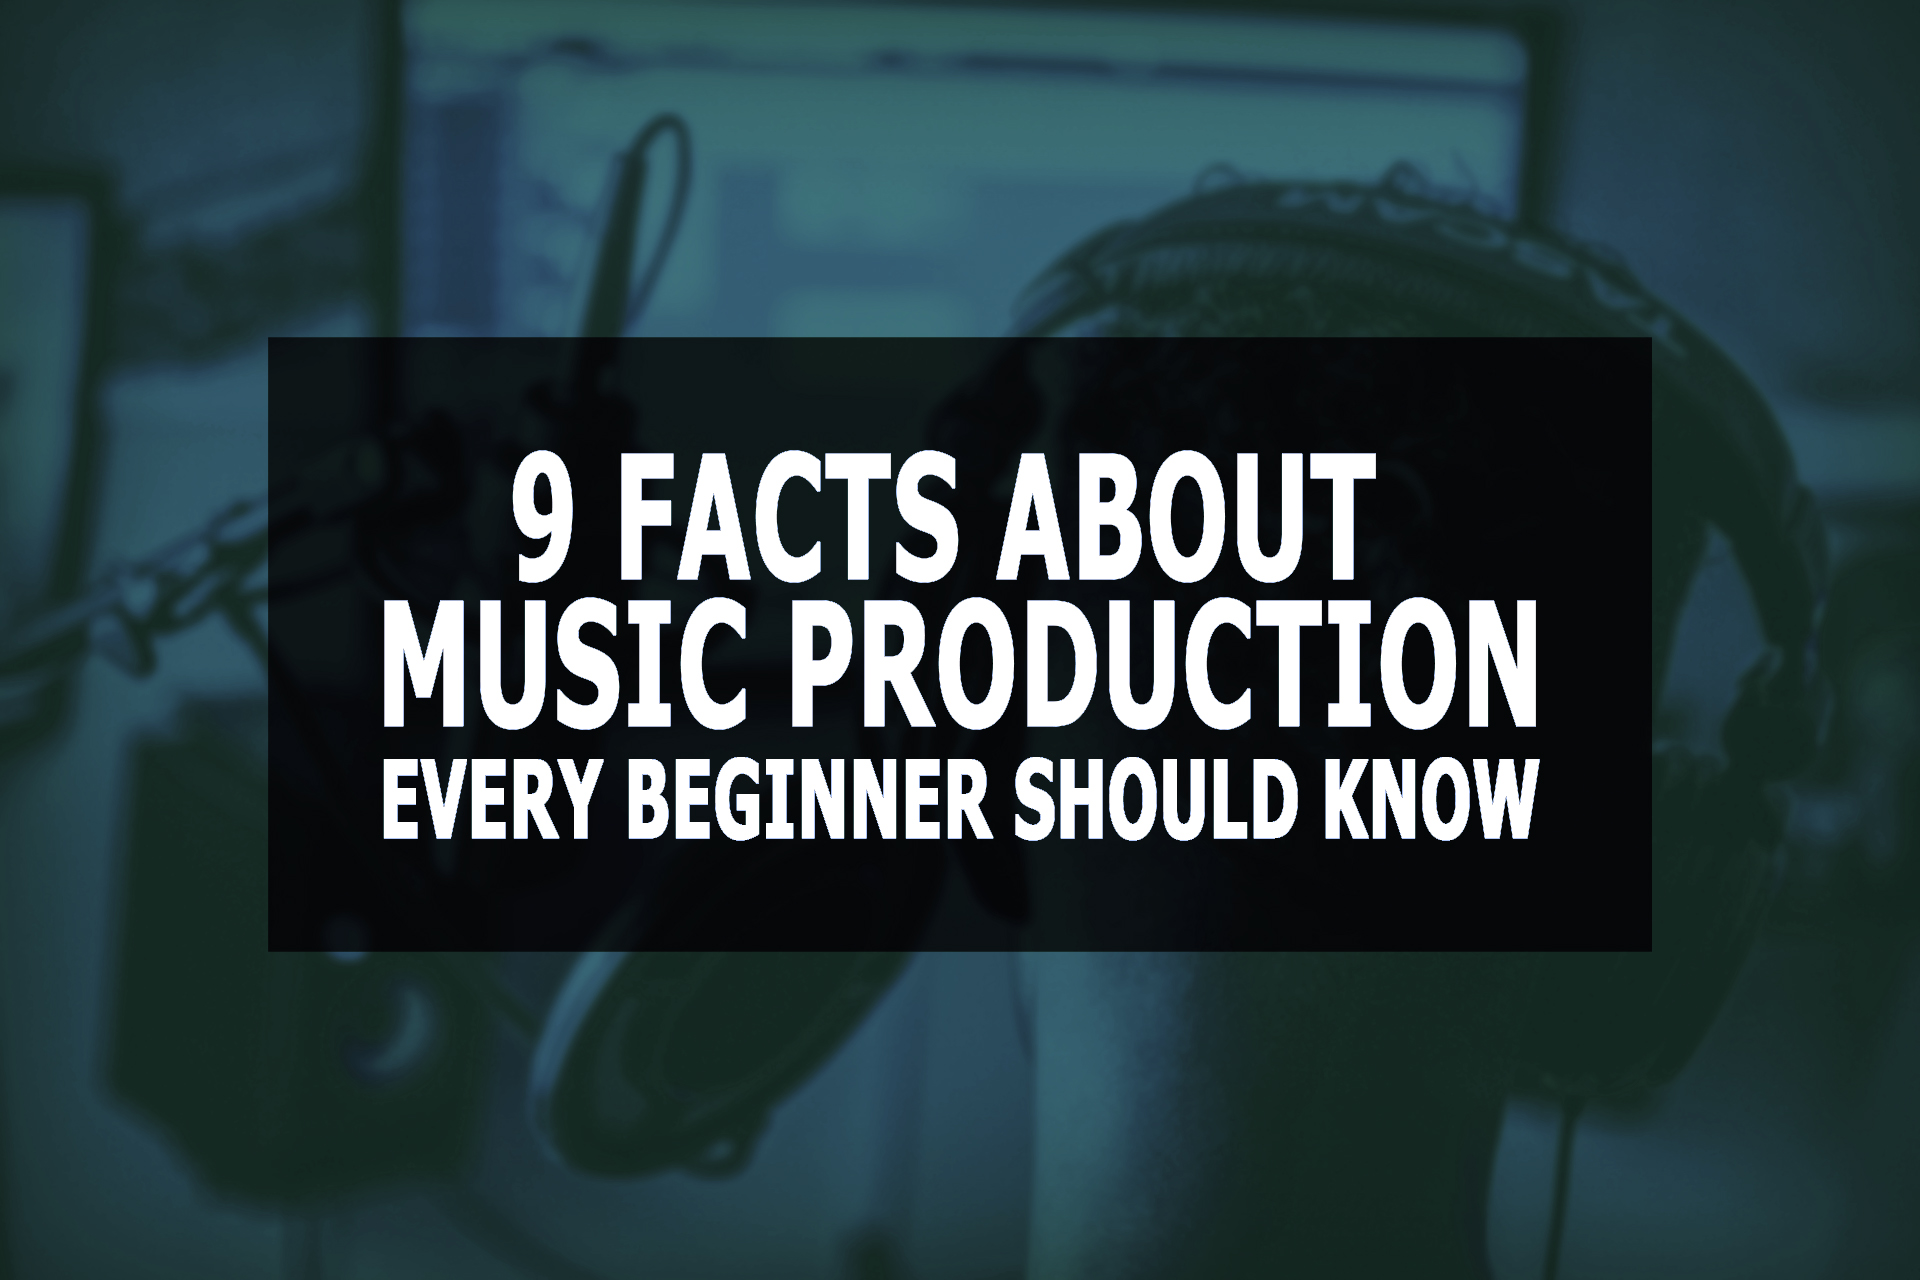 9 Facts About Electronic Music Production